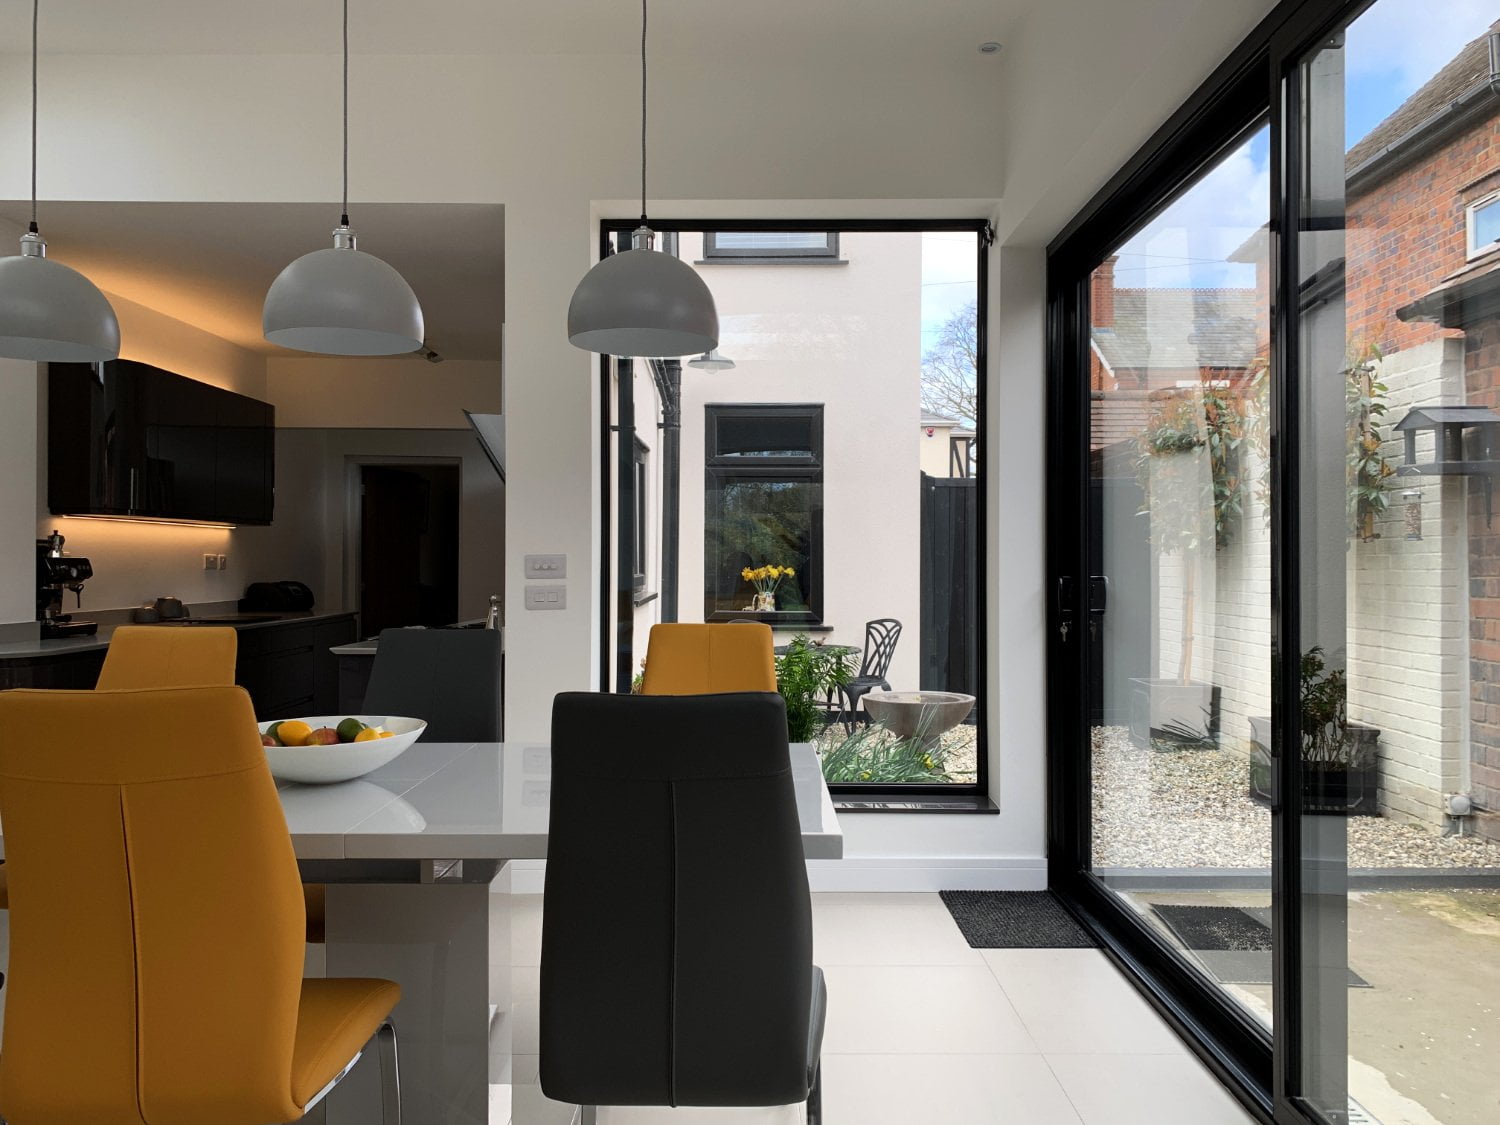 Modernist Rear Extension to Victorian Terrace in Stourbridge, West Midlands